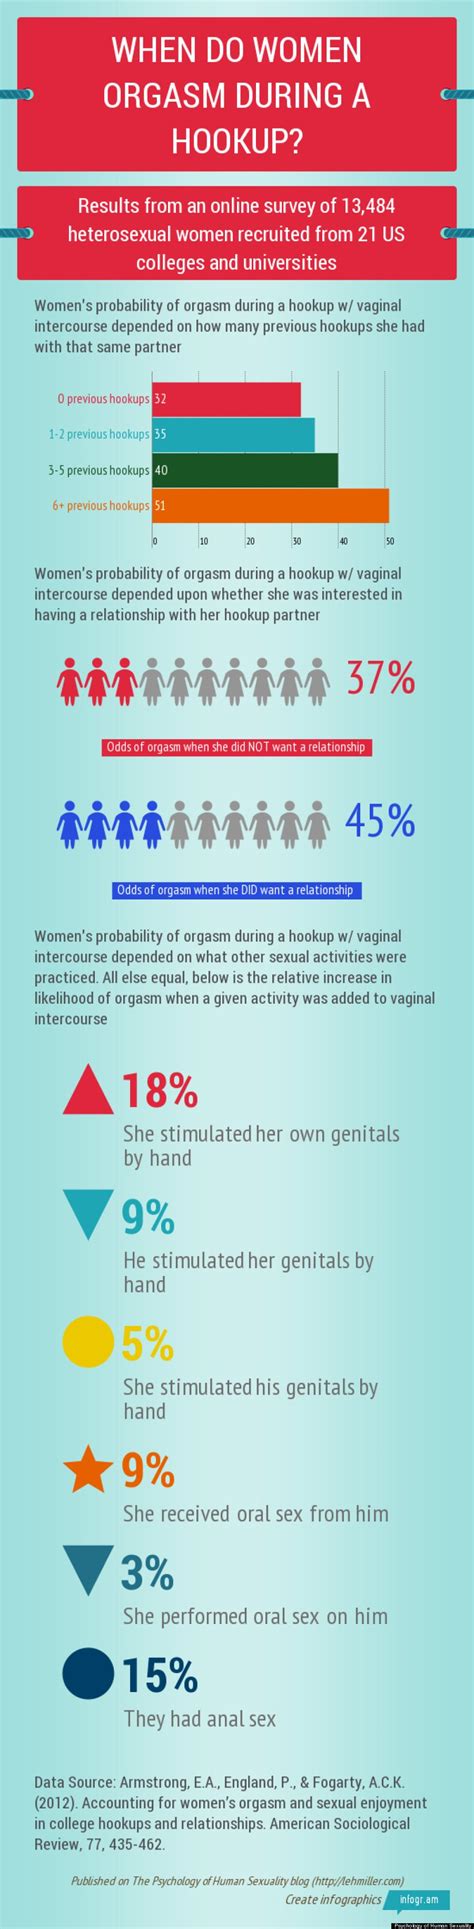 what everyone should know about the female orgasm and hooking up infographic huffpost life